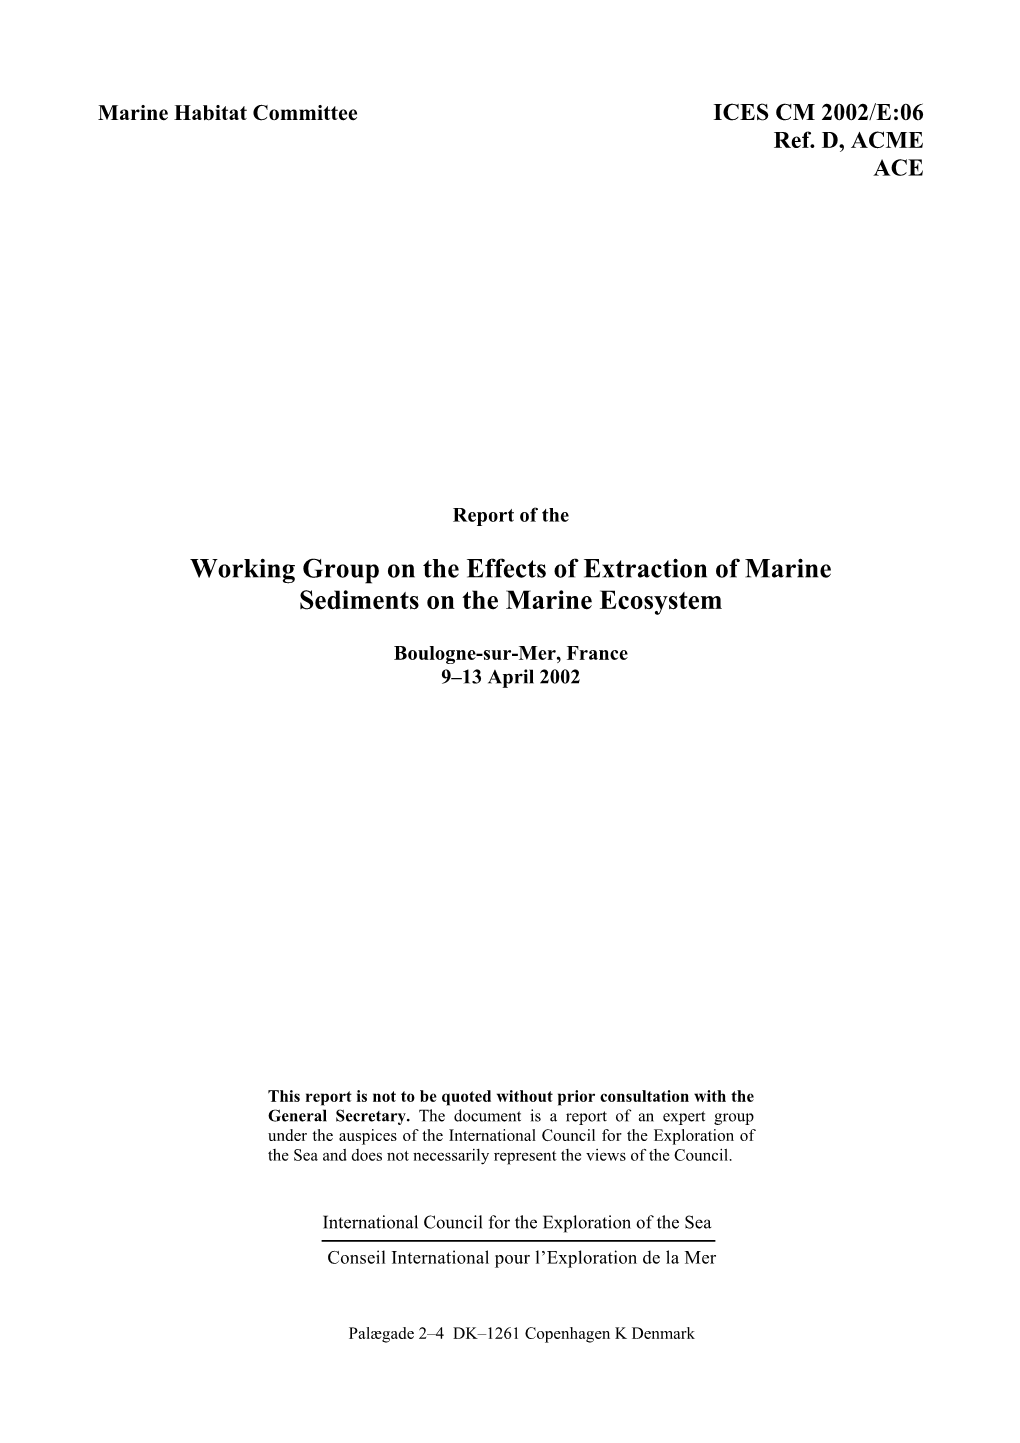 Working Group on the Effects of Extraction of Marine Sediments on the Marine Ecosystem